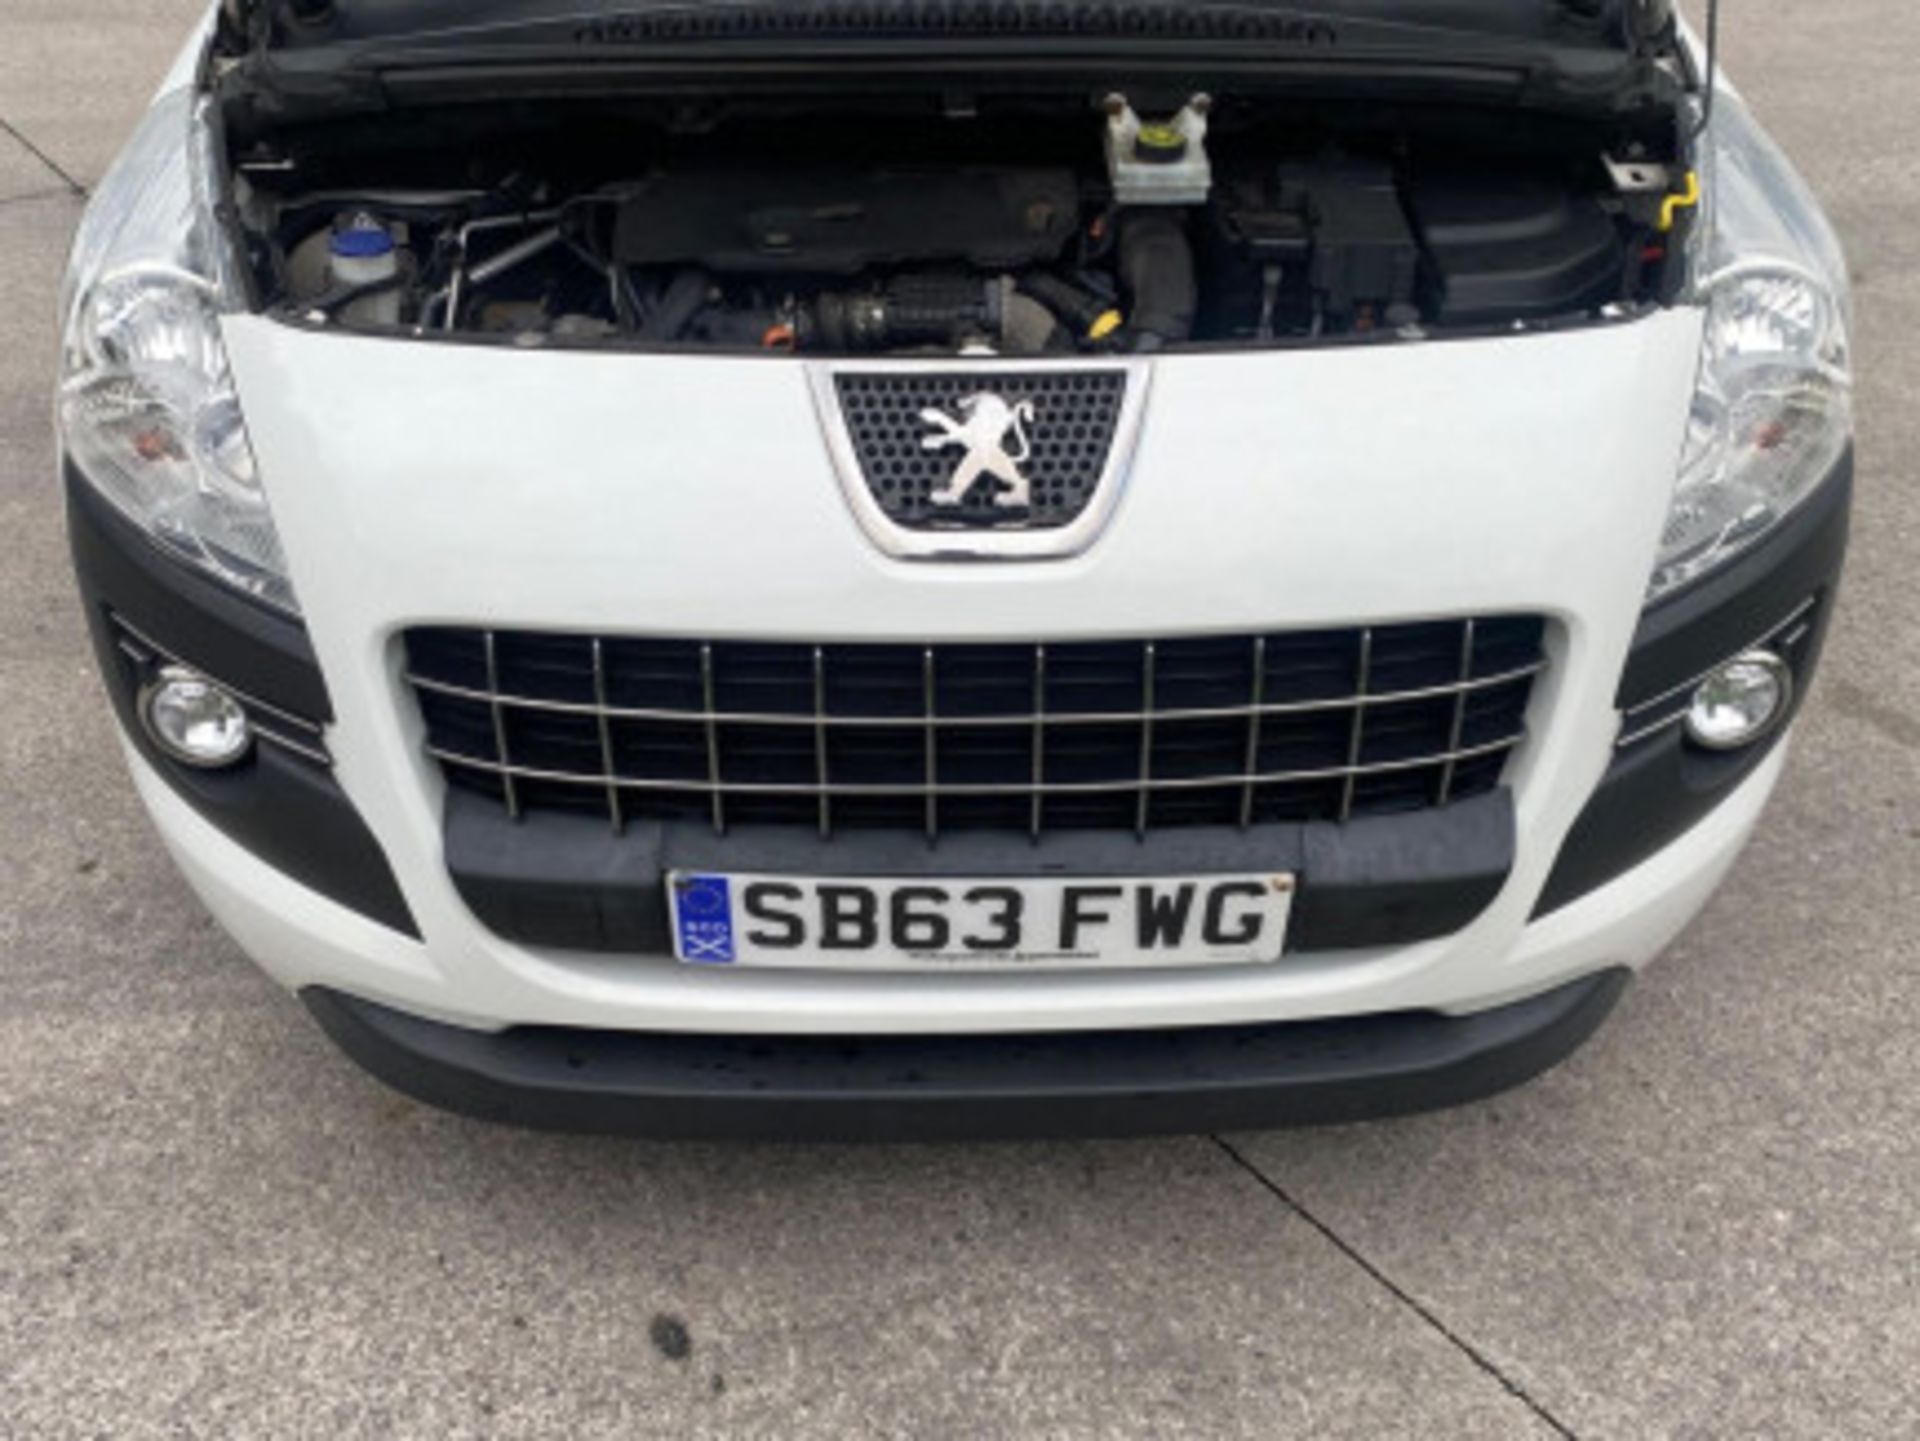 2013 PEUGEOT 3008 1.6 HDI ACTIVE EURO 5 5DR >>--NO VAT ON HAMMER--<< - Image 29 of 69